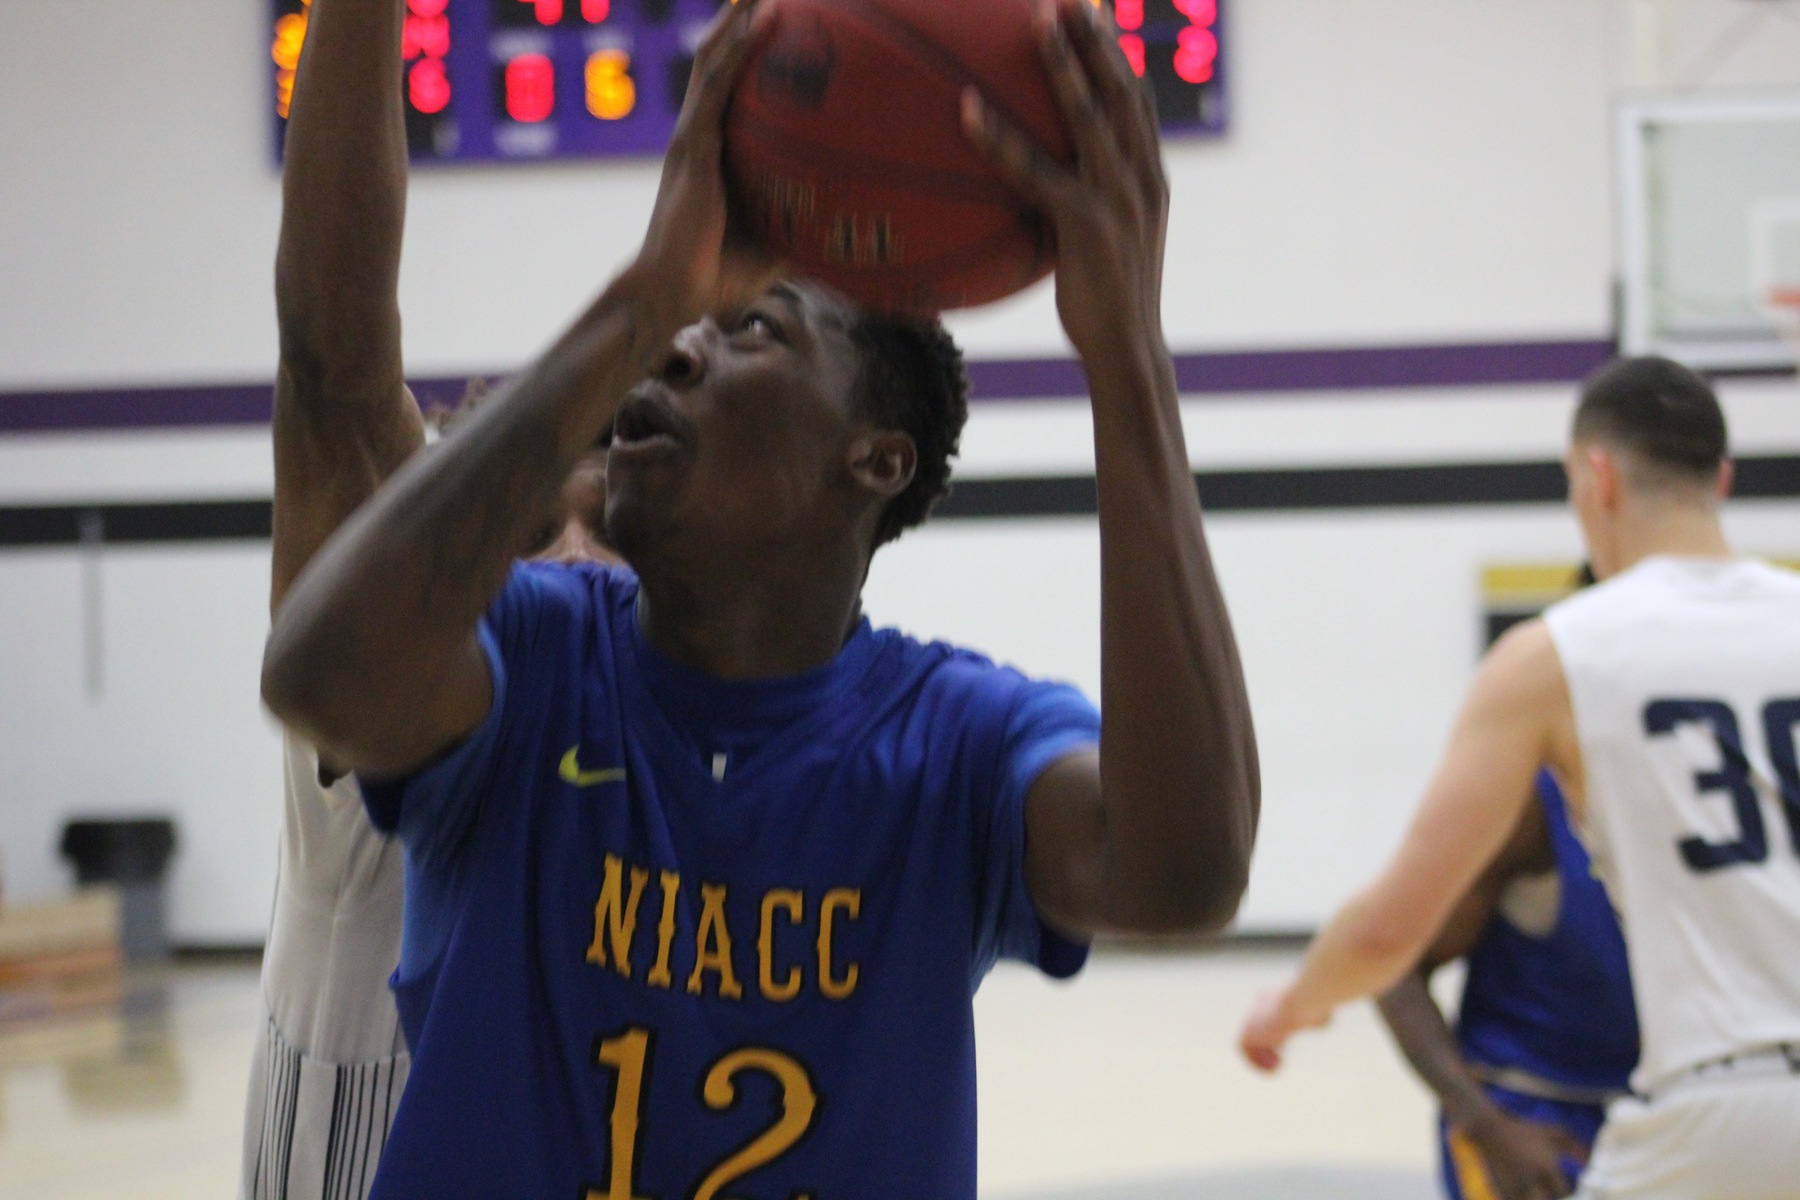 NIACC's Wendell Matthews takes the ball to the basket in Friday's game against Marshalltown CC.